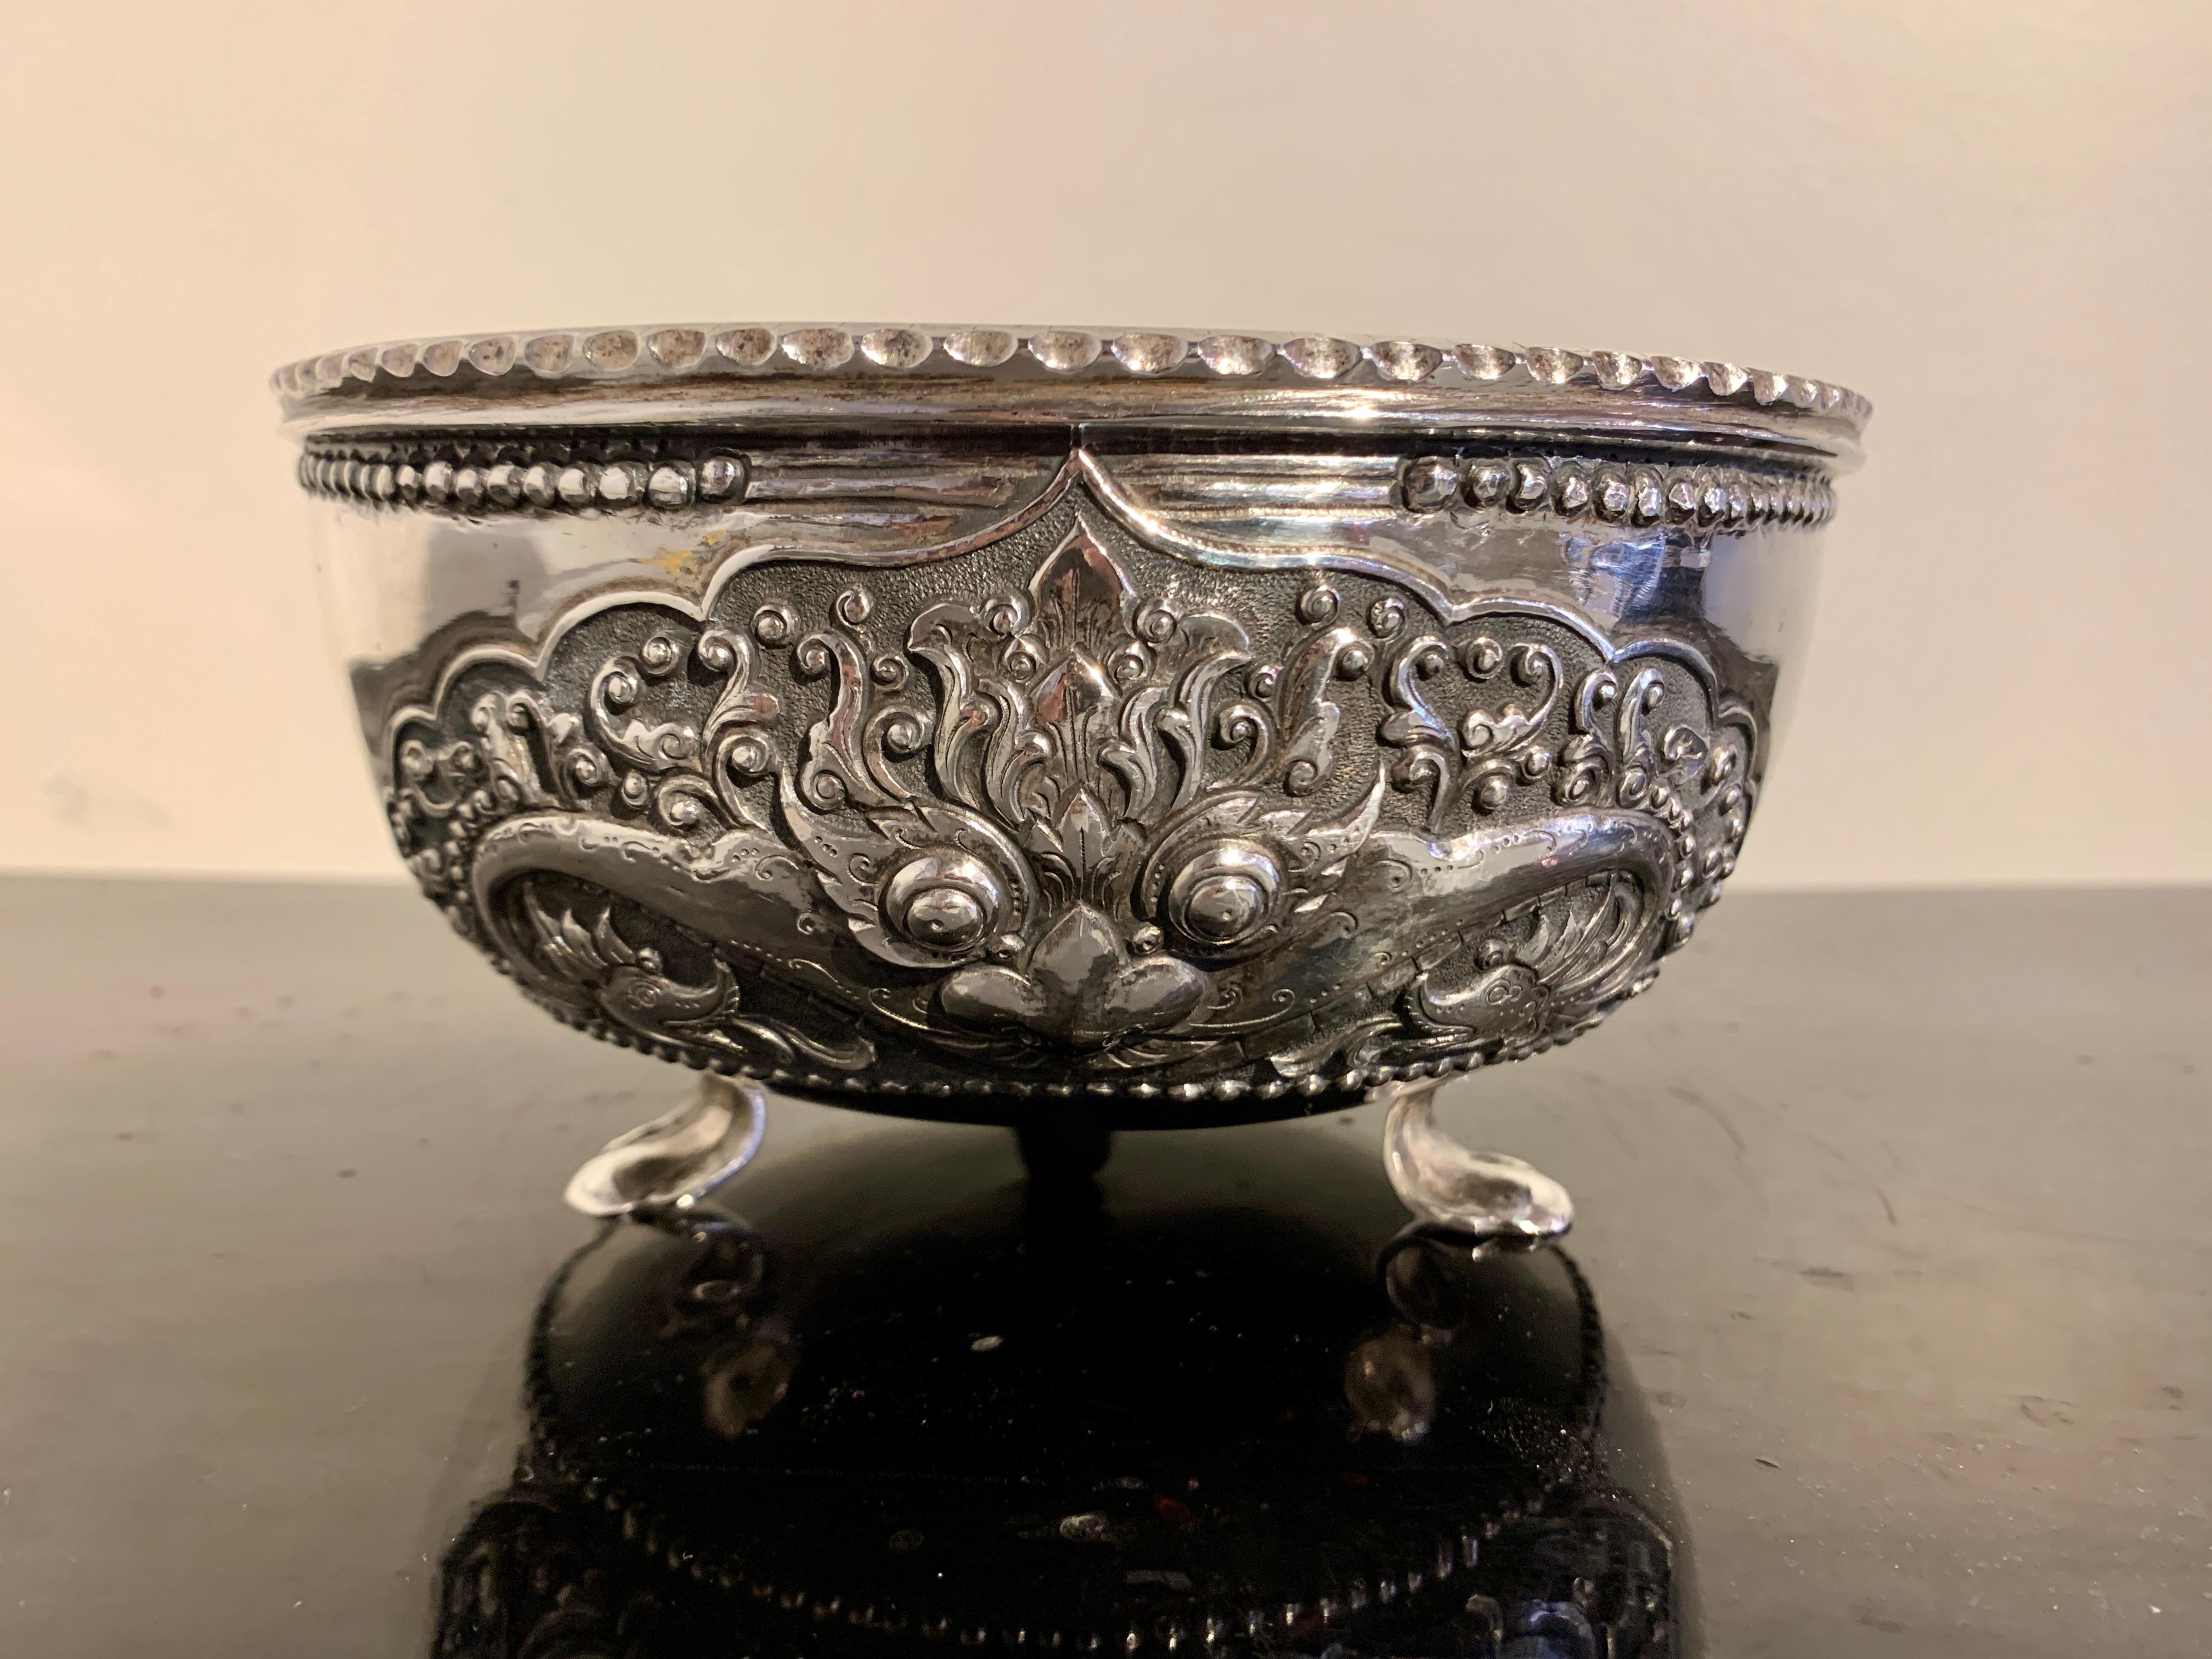 A bold and well crafted Indonesian Yogya (Jogja, Djokja) silver bowl by Tom's Silver, Yogyakarta, Java, Indonesia, circa 1960's. 

The elegant bowl features a striking design of a Kala face, a protective monster often found above temple doors, and